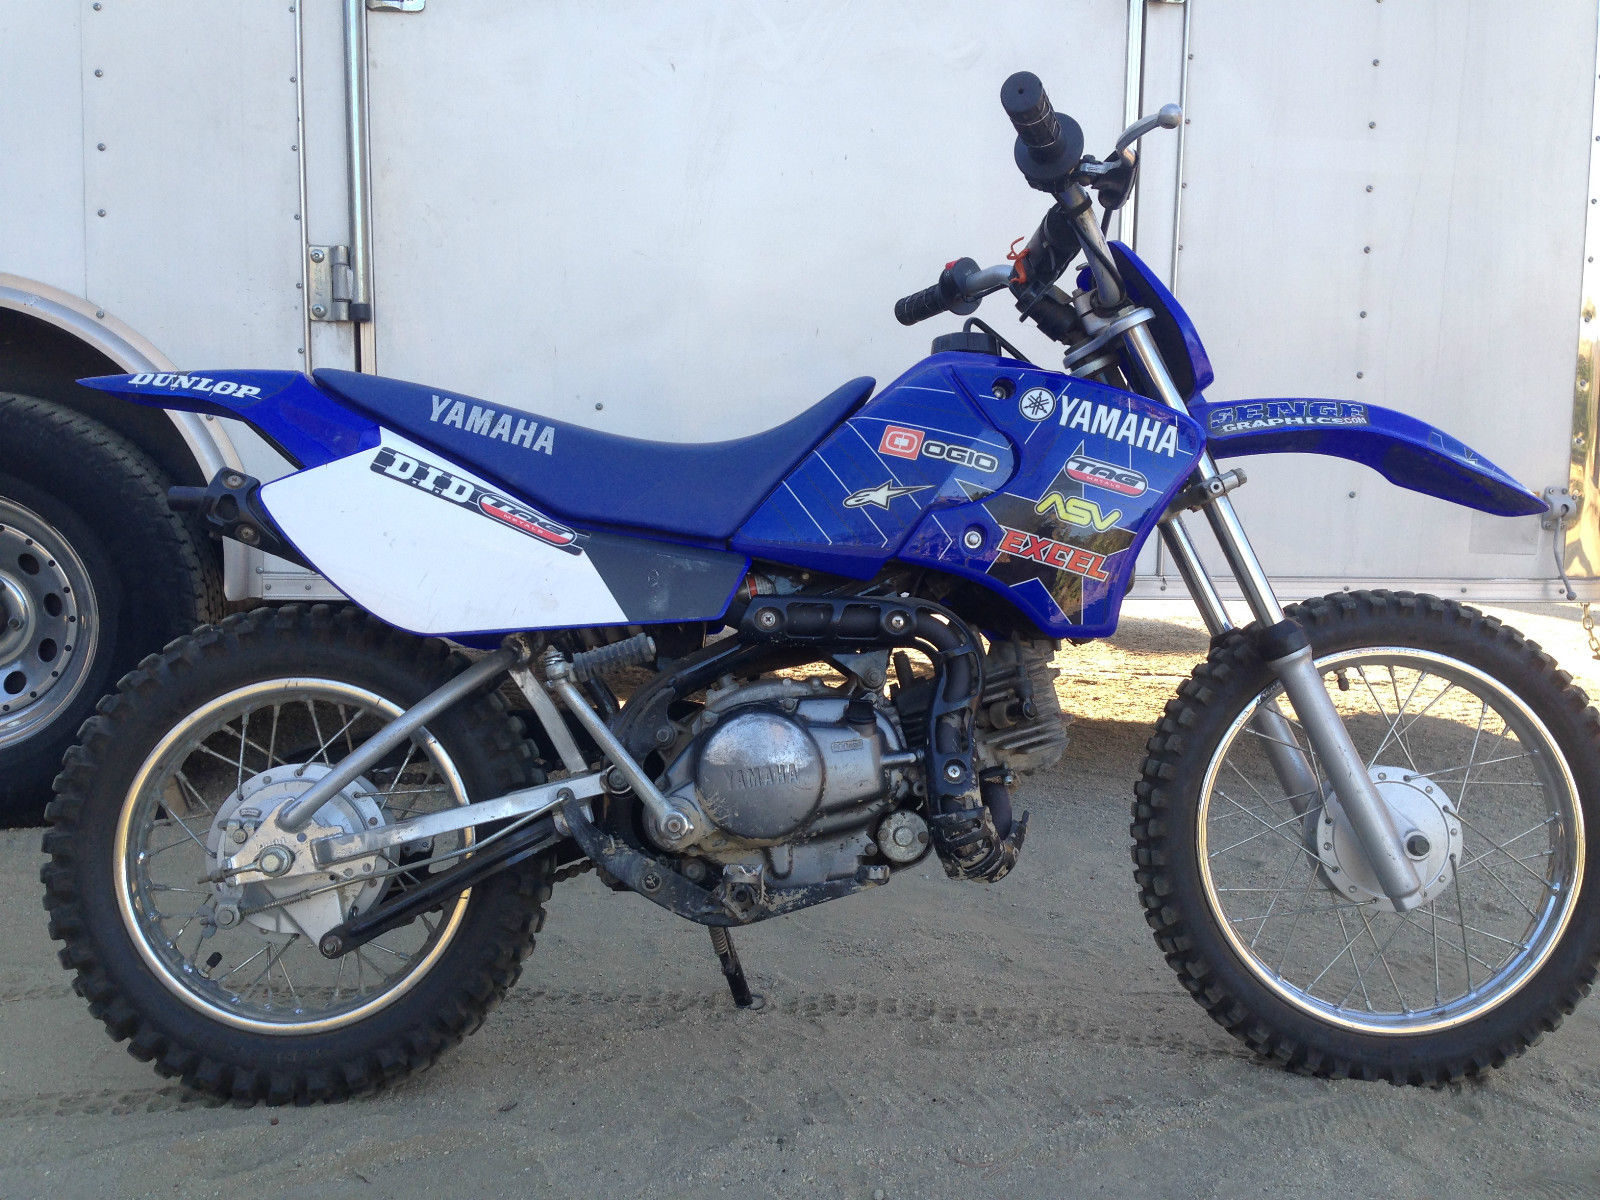 Yamaha TTR90 Motorcycle 90cc, 3speed Automatic, Great Youth Dirt or